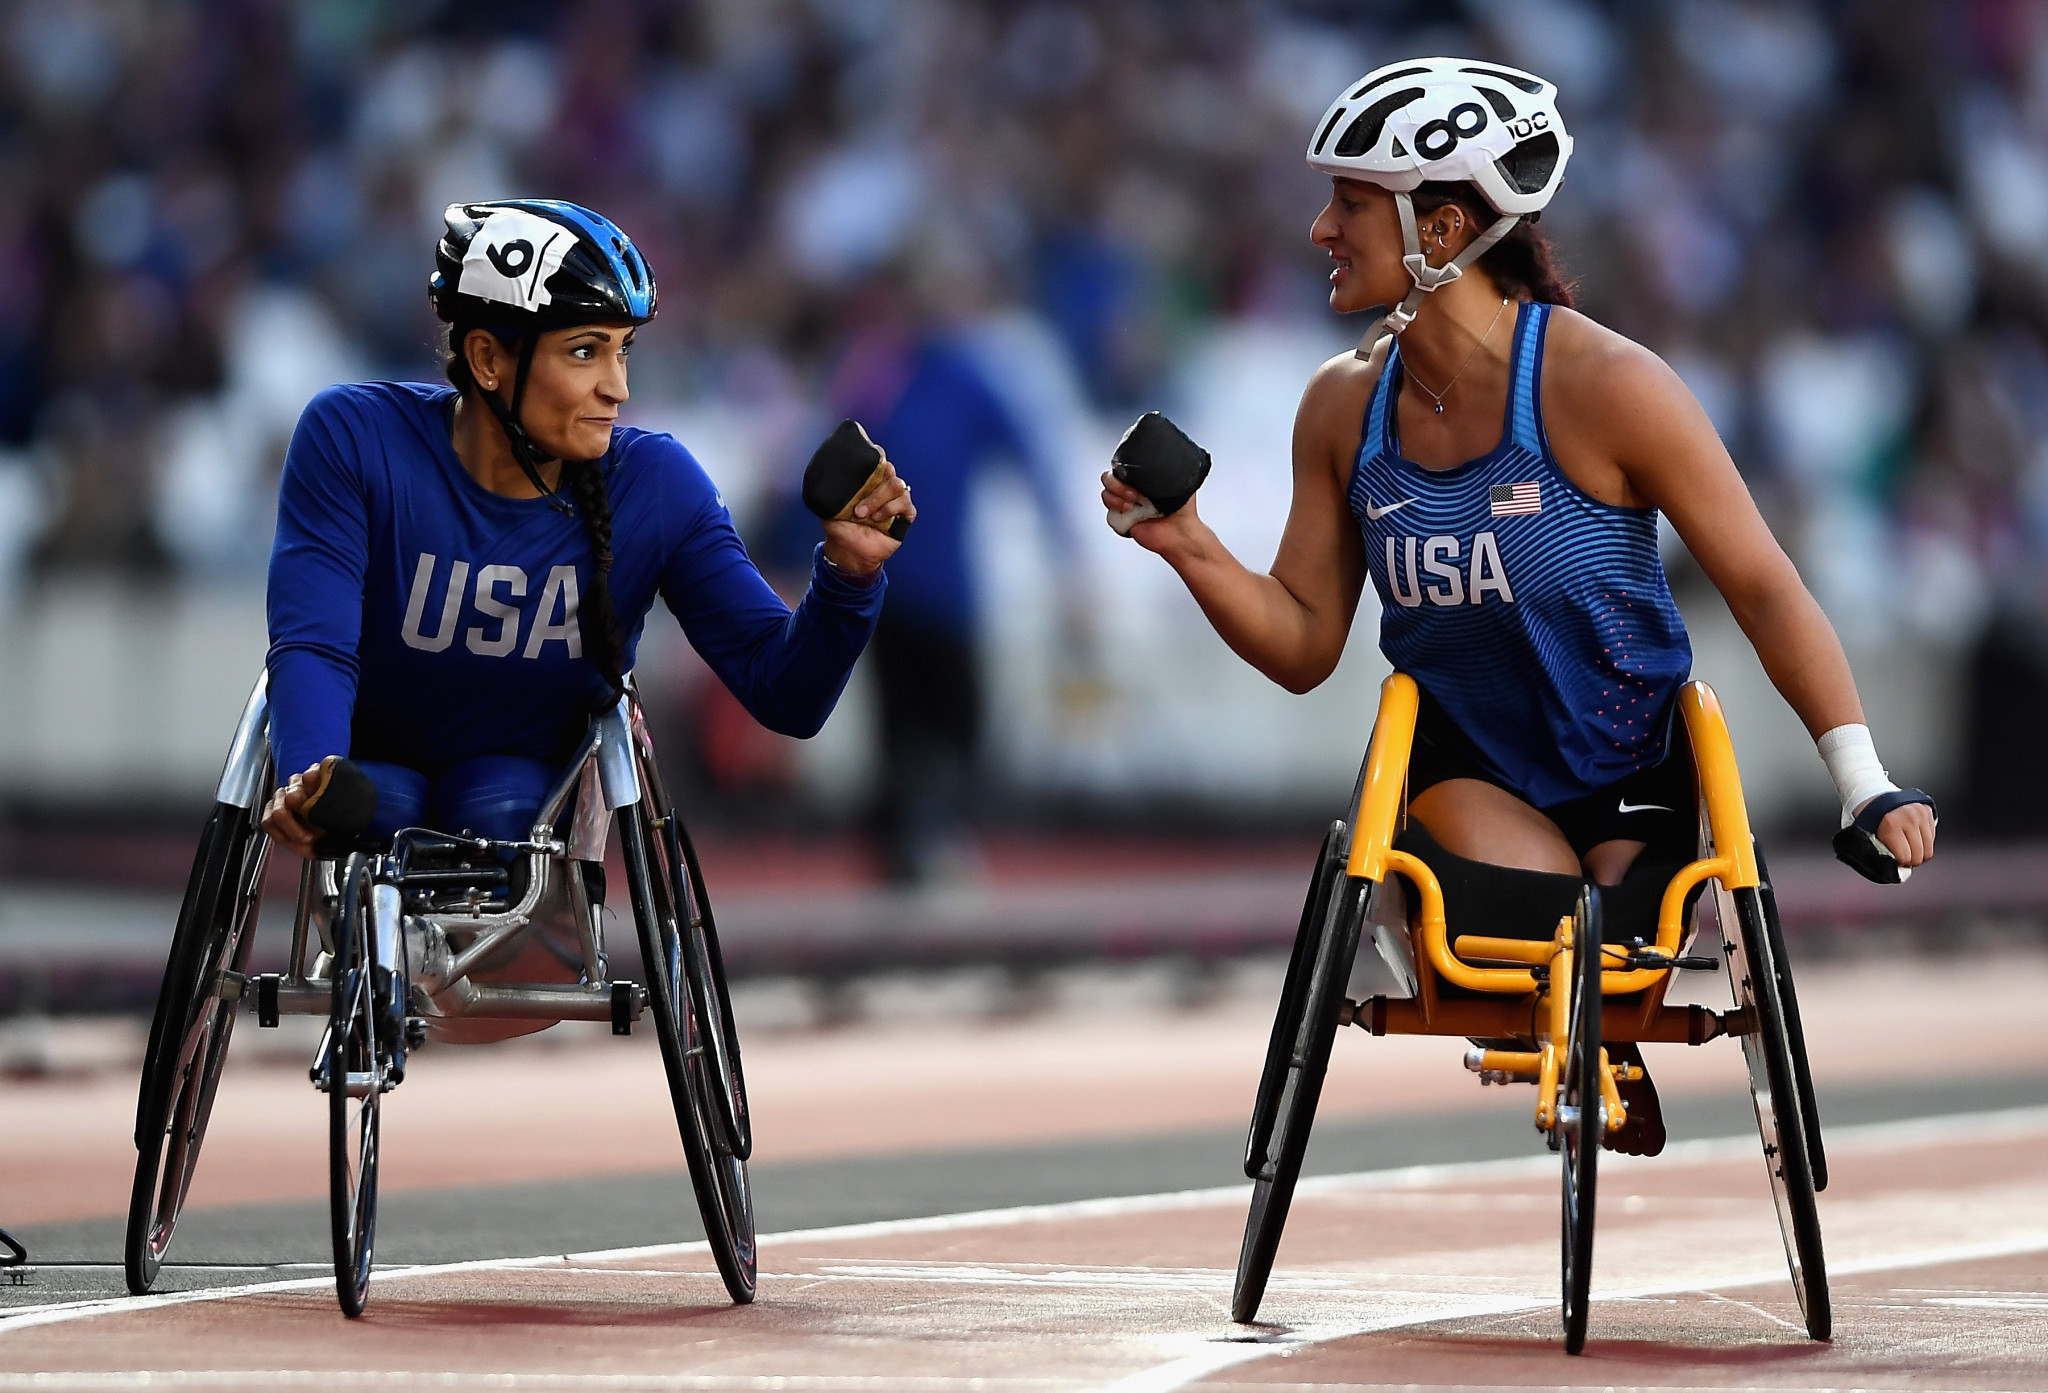 Biographical information will be collected and updated by Gracenote sports editors at next year's World Para Athletics Championships in the build-up to Tokyo 2020 ©Getty Images